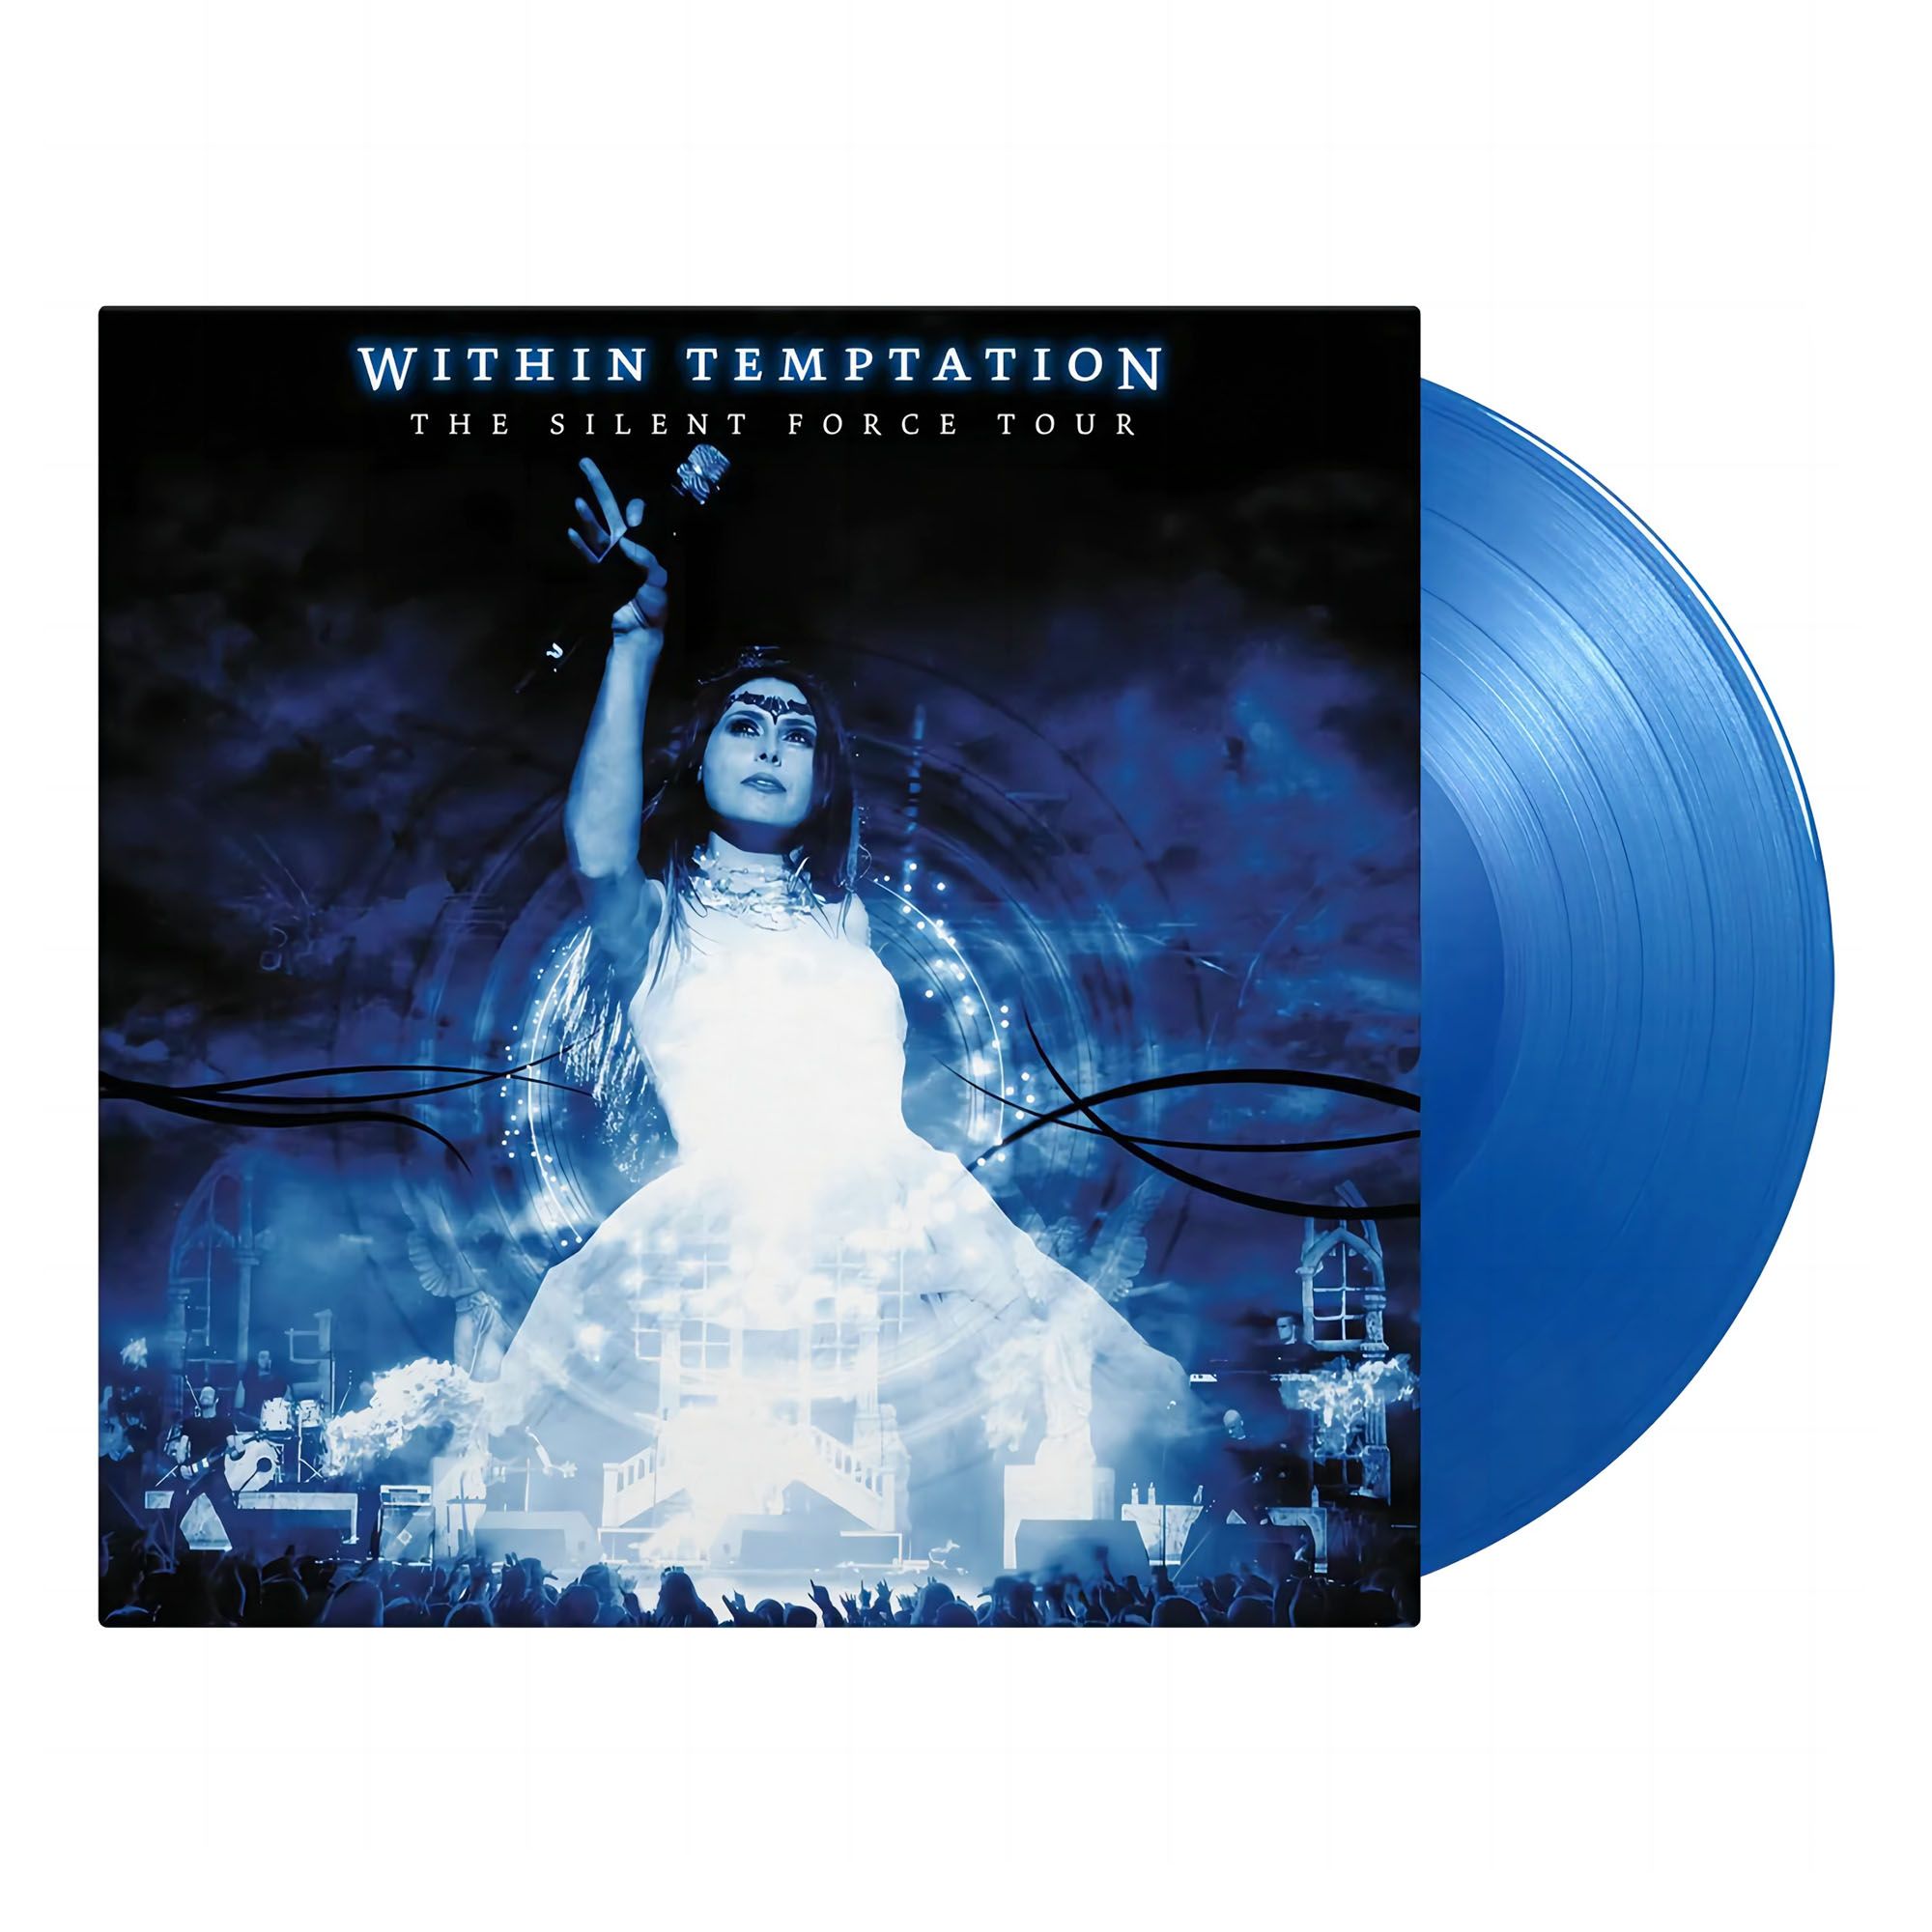 Within Temptation the Silent Force. Within Temptation концерт. Within Temptation Bleed out. The Silent Force Instrumental within Temptation. Within temptation bleed